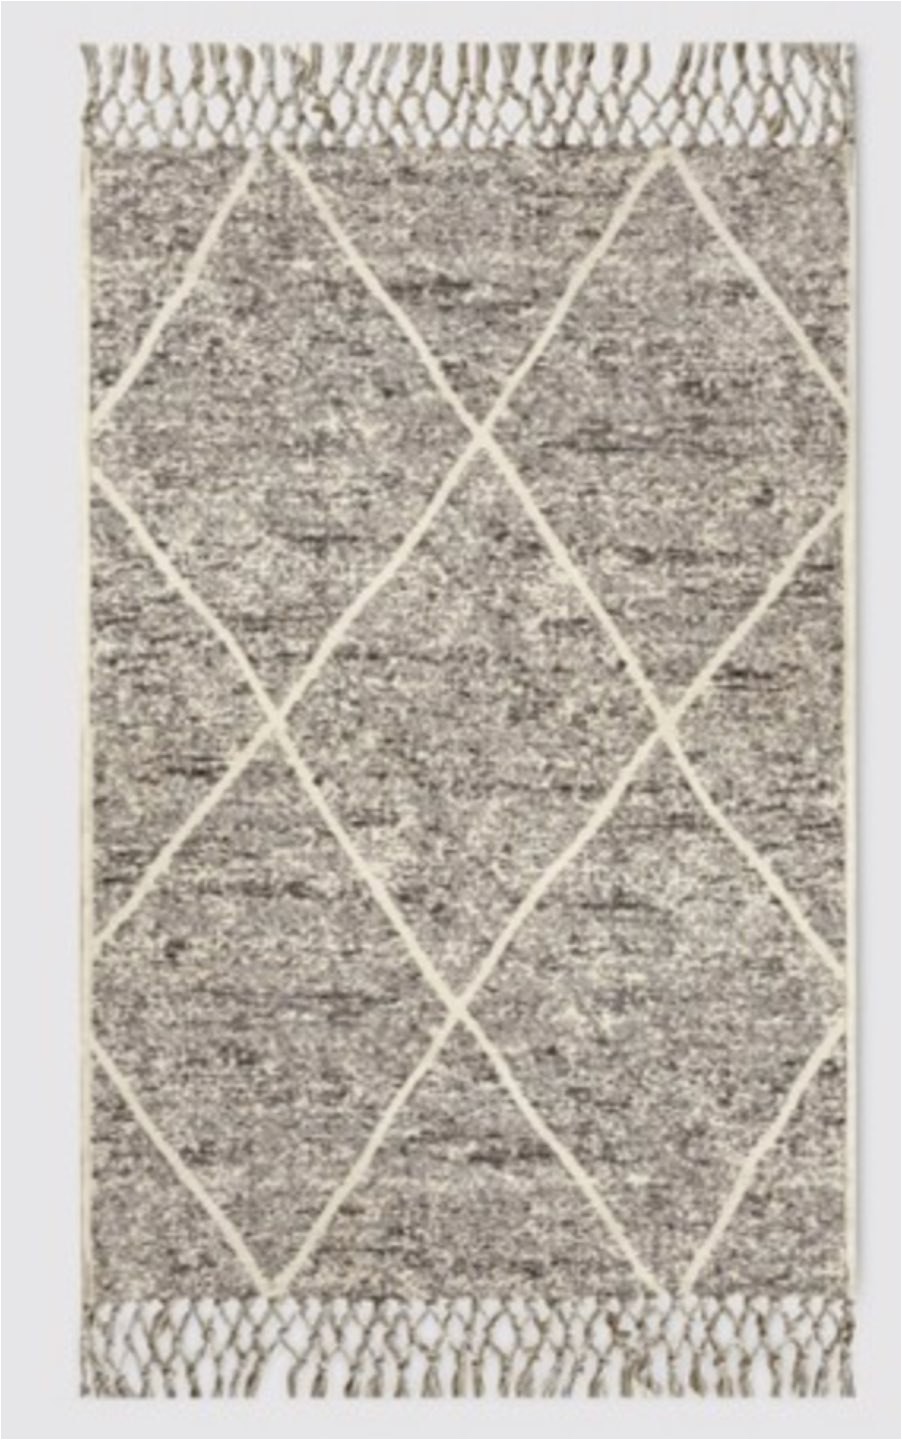 Best area Rugs On Amazon top 6 Best area Rugs for Your Space From Amazon and Tar